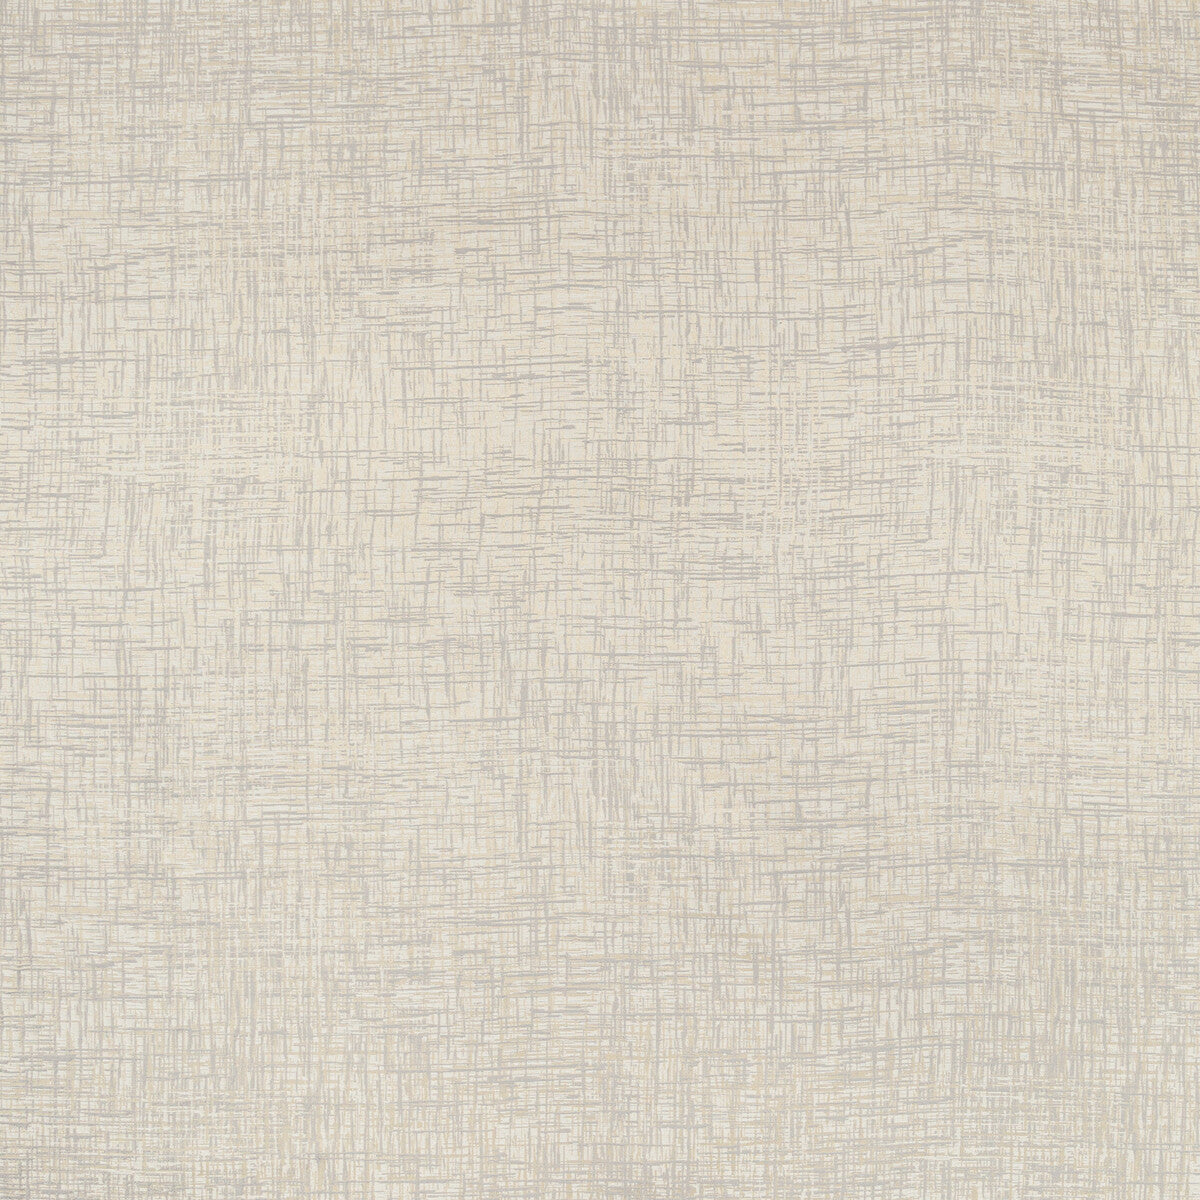 Maeve fabric in limestone color - pattern 4651.1611.0 - by Kravet Contract